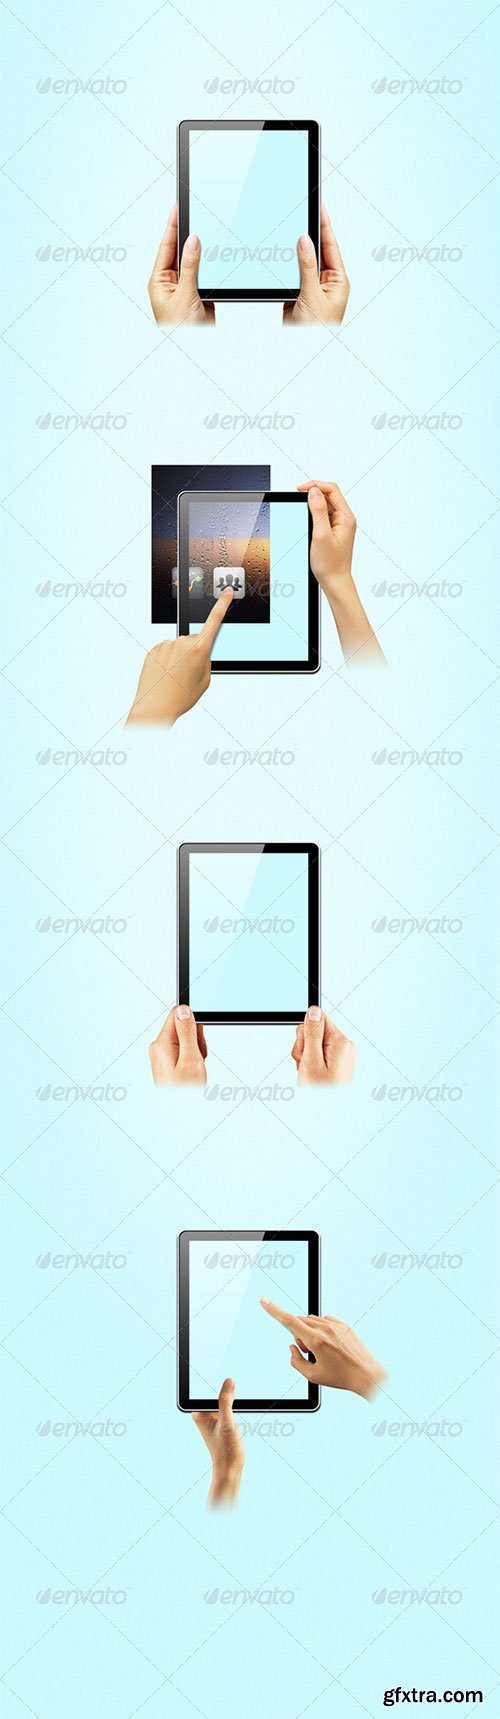 GraphicRiver - Hands on tablet